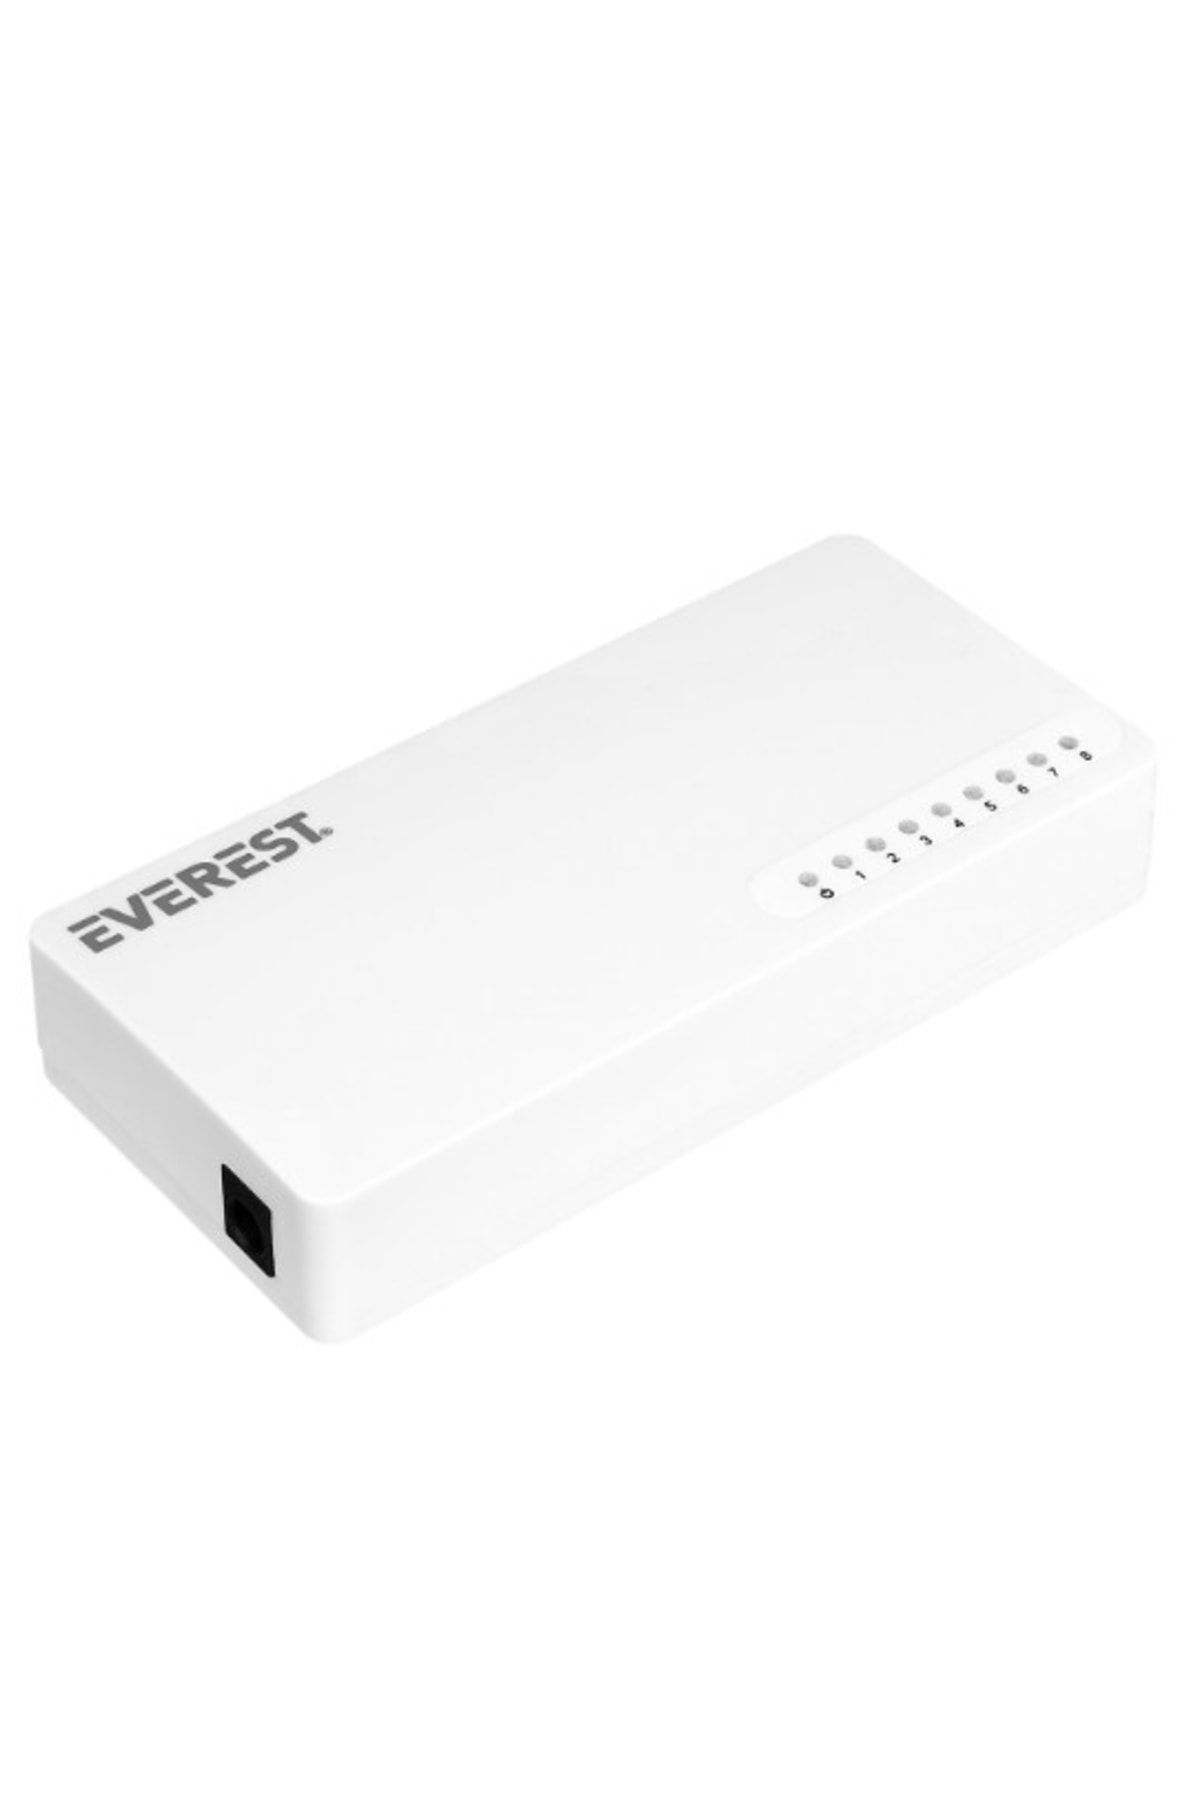 Everest Esf208 8 Port 10/100mbps Rtl8305 Switch